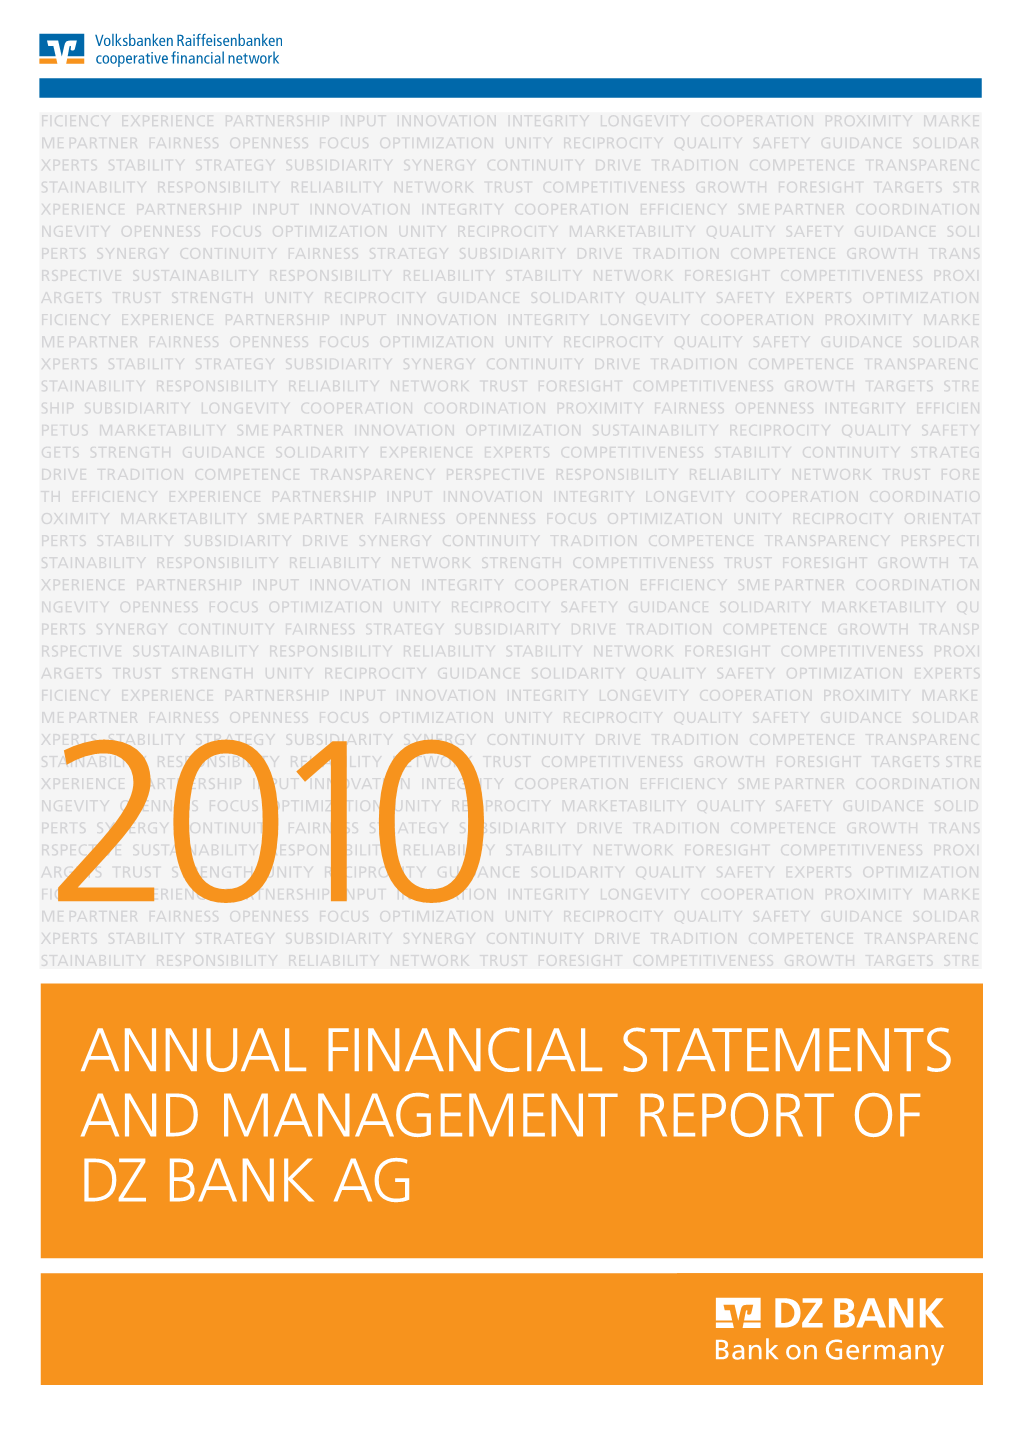 Annual Financial Statements and Management Report Of